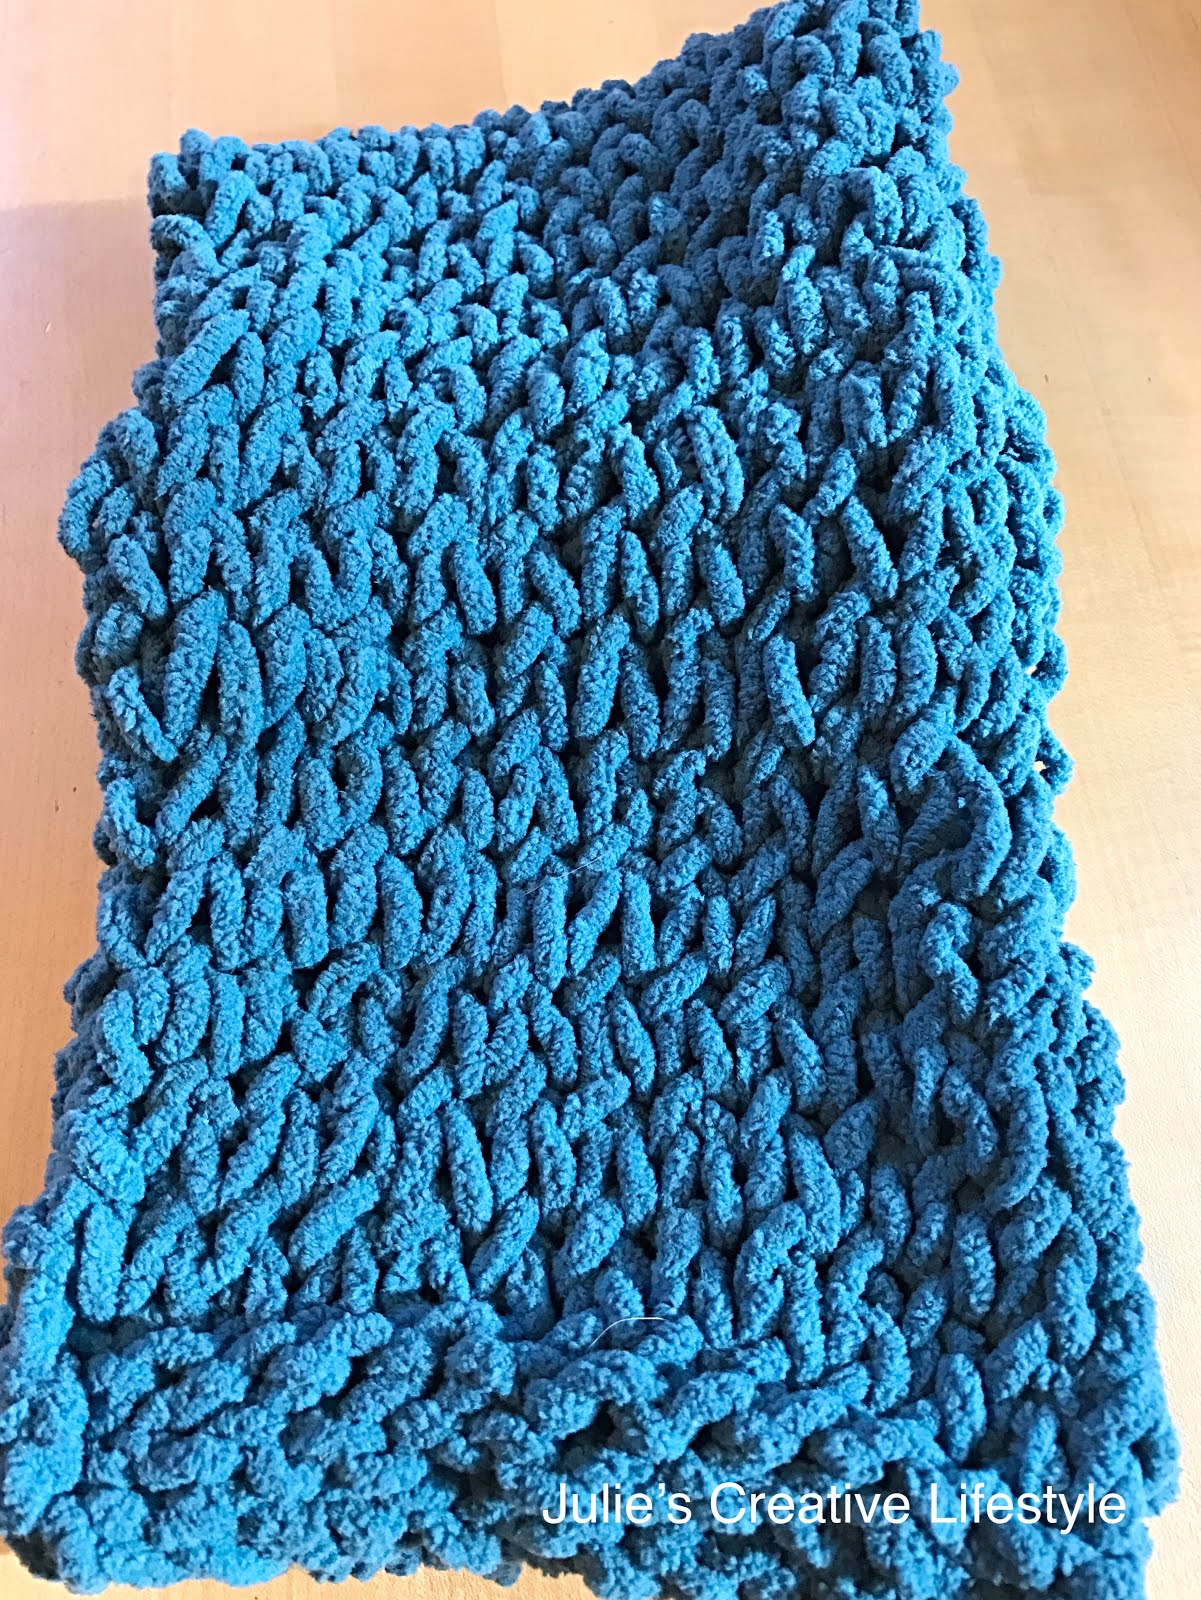 Need pattern suggestions for some Bernat Blanket Big yarns. I want to make  a blanket but I don't want it to be too simple. : r/crochet